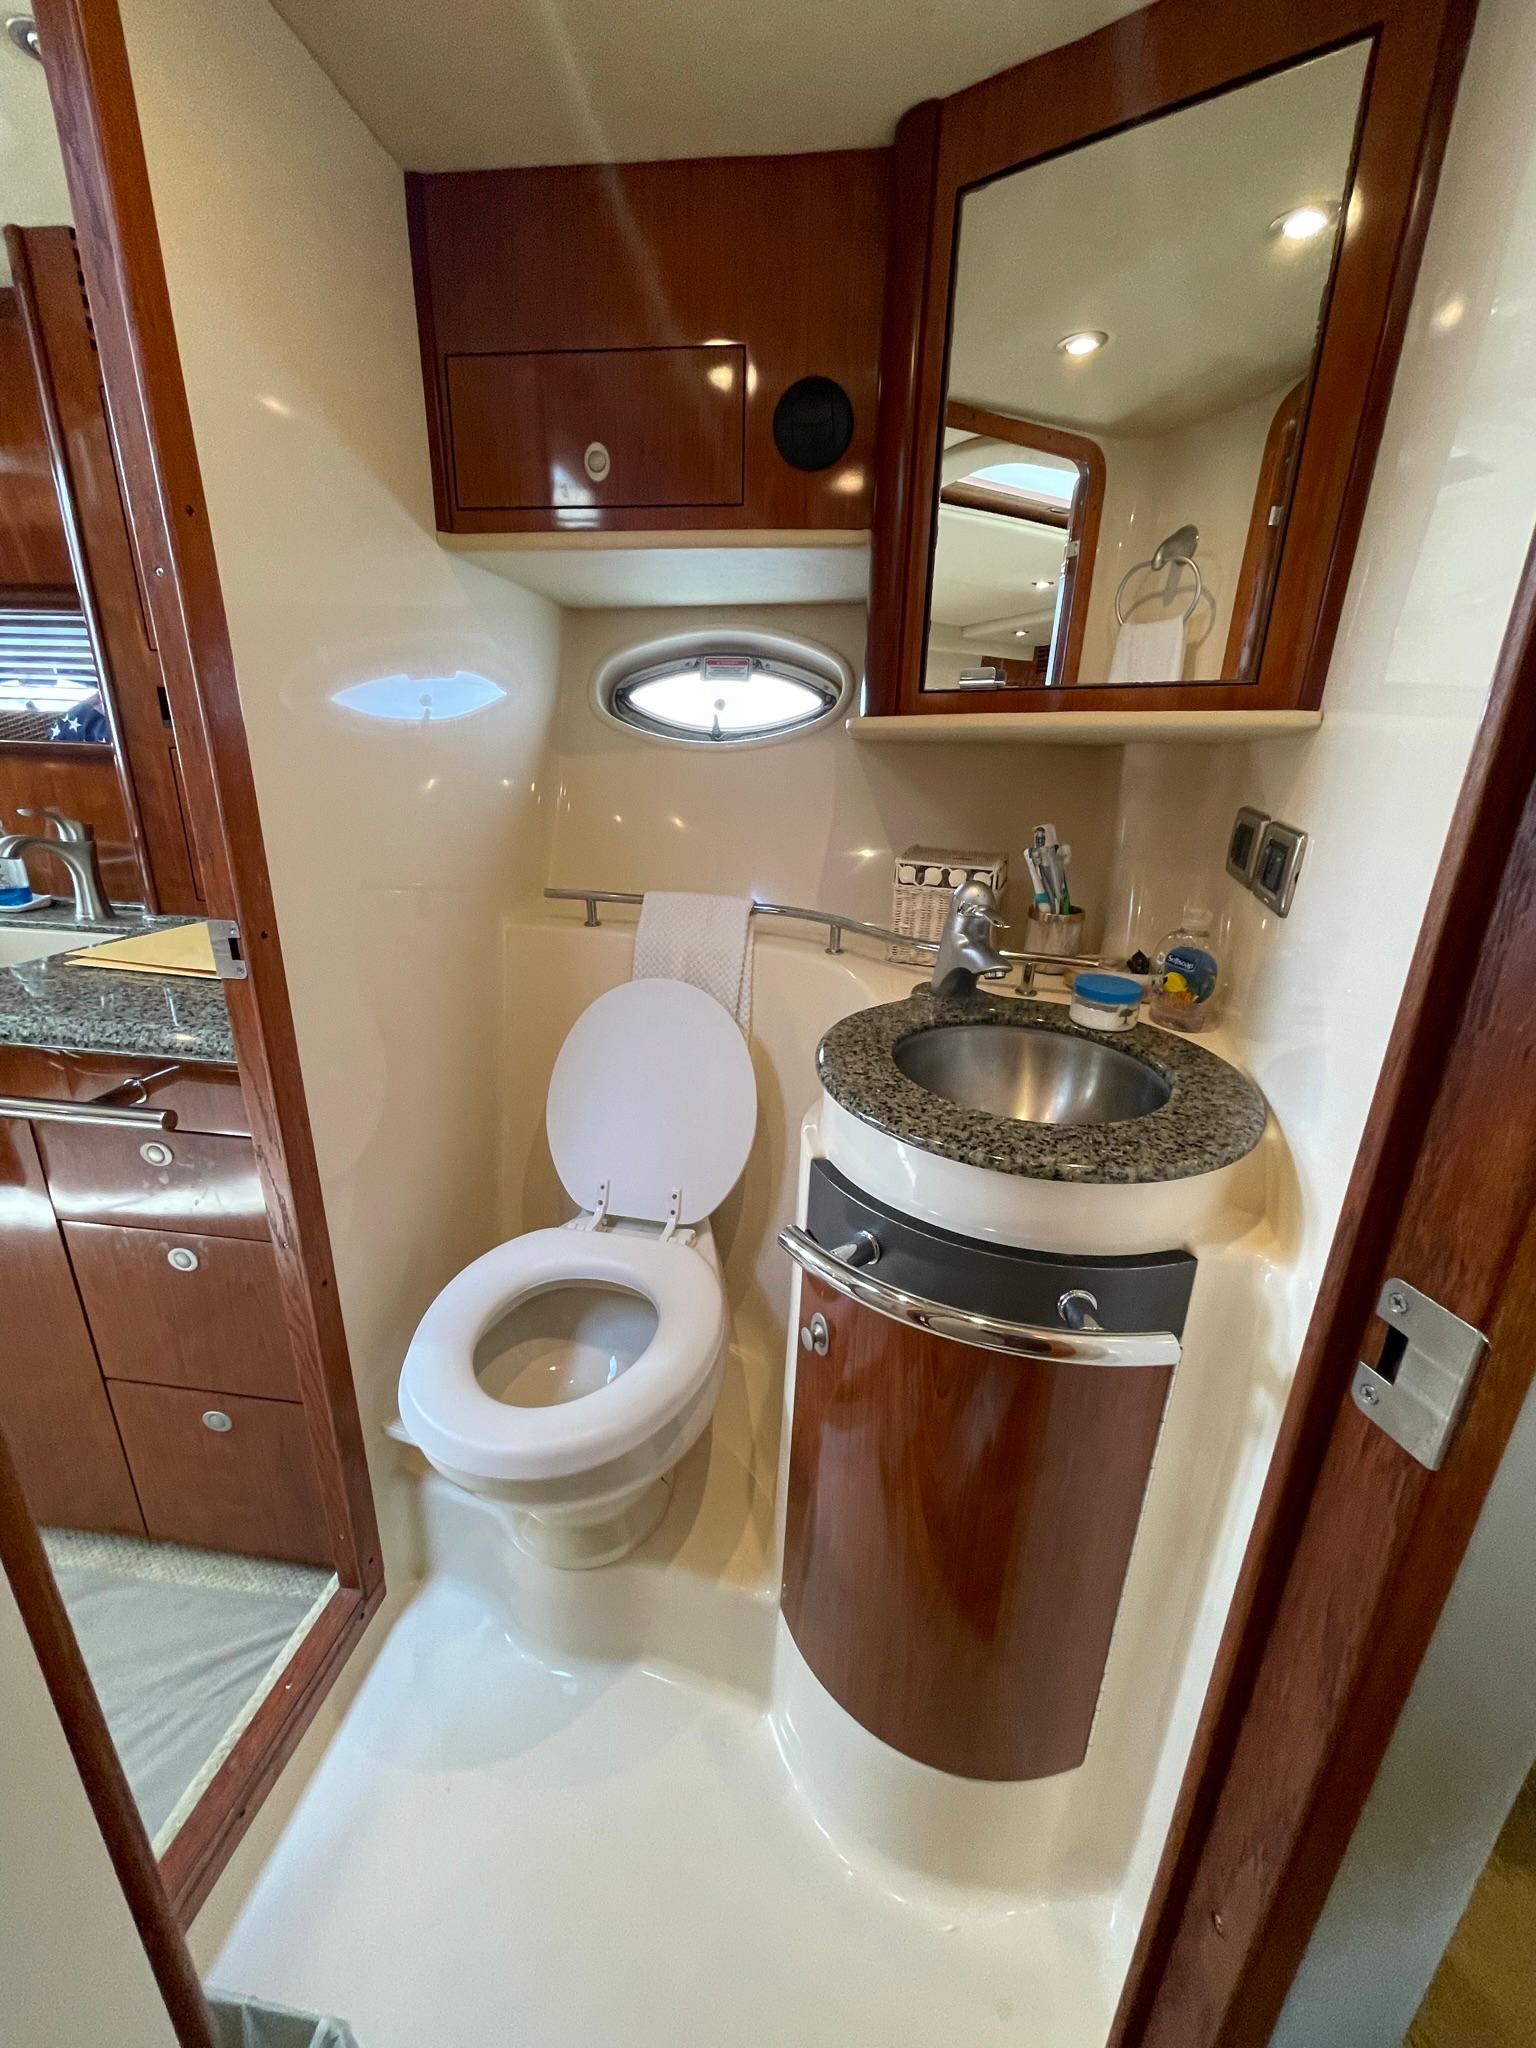 HEAD WITH VANITY, VACU-FLUSH FRESH WATER TOILET AND TWO ENTRANCES